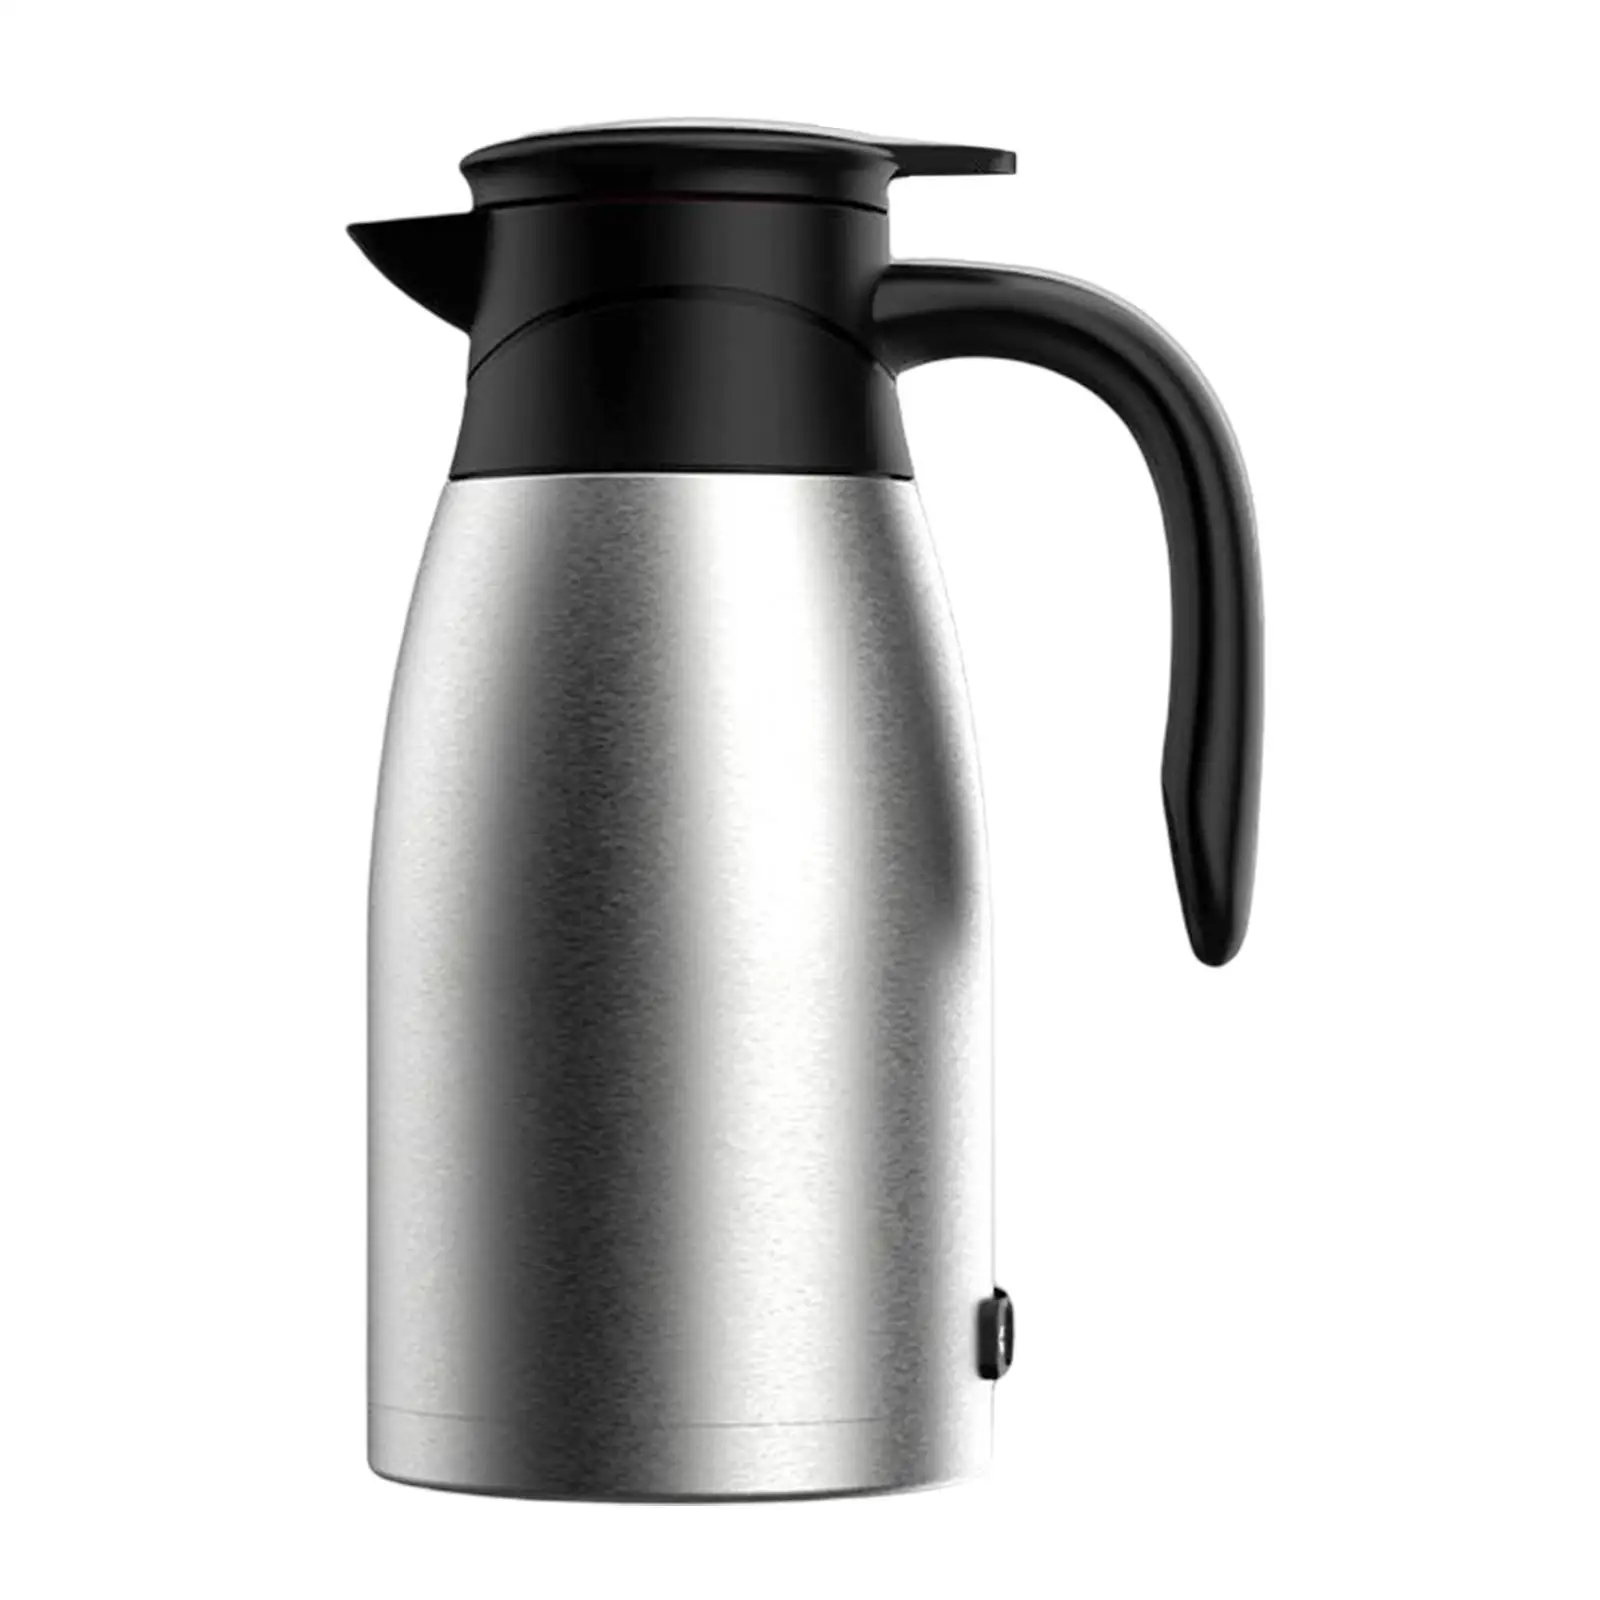 Portable 24 Truck Kettle Boiler Stainless Steel Insulated Temperature Display Heated Water Boiler for Coffee Travel Outdoor